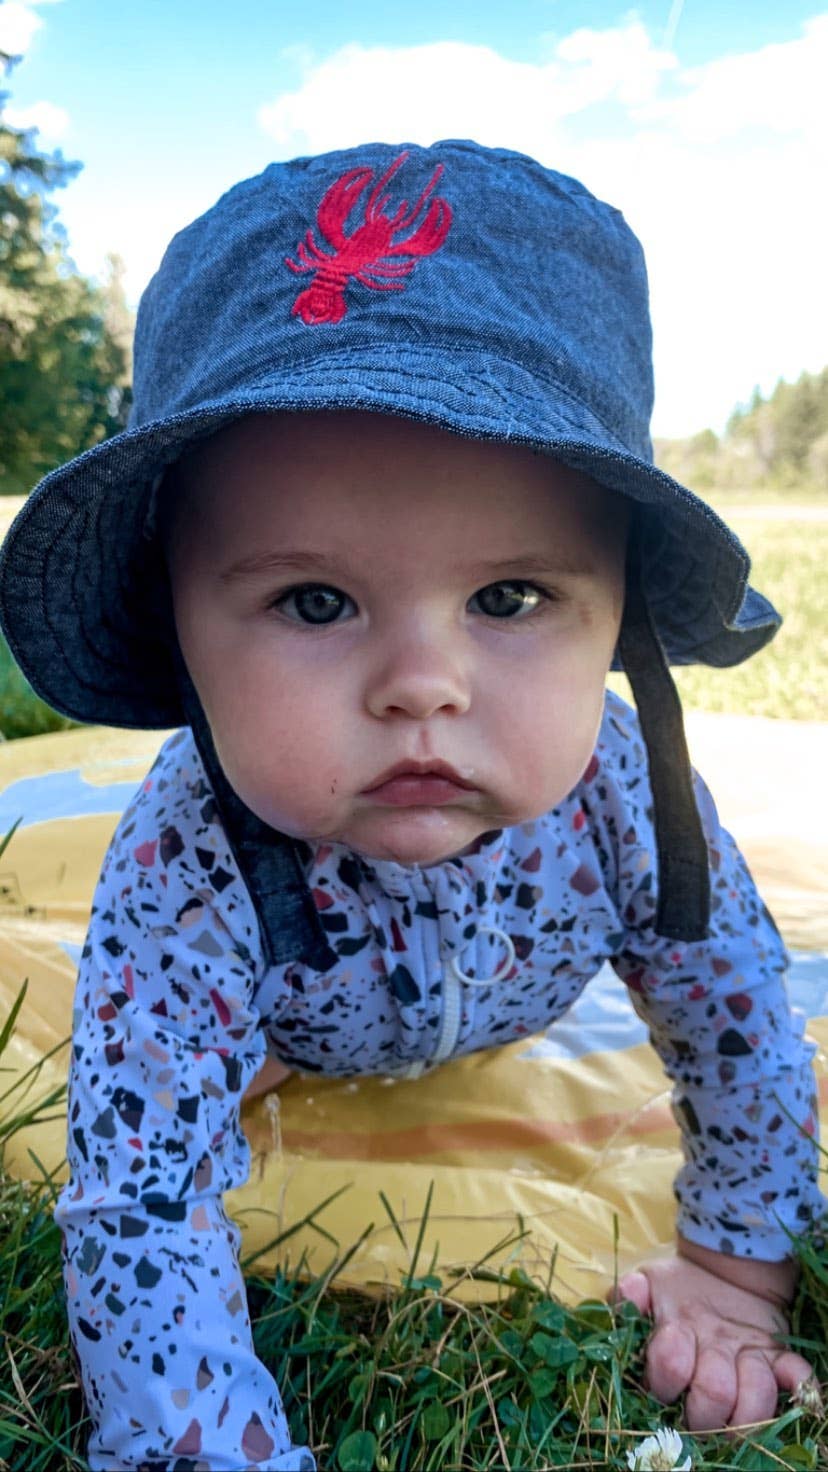 Huggalugs Lobster UPF 25+ Chambray Bucket Hat 0-6 Months